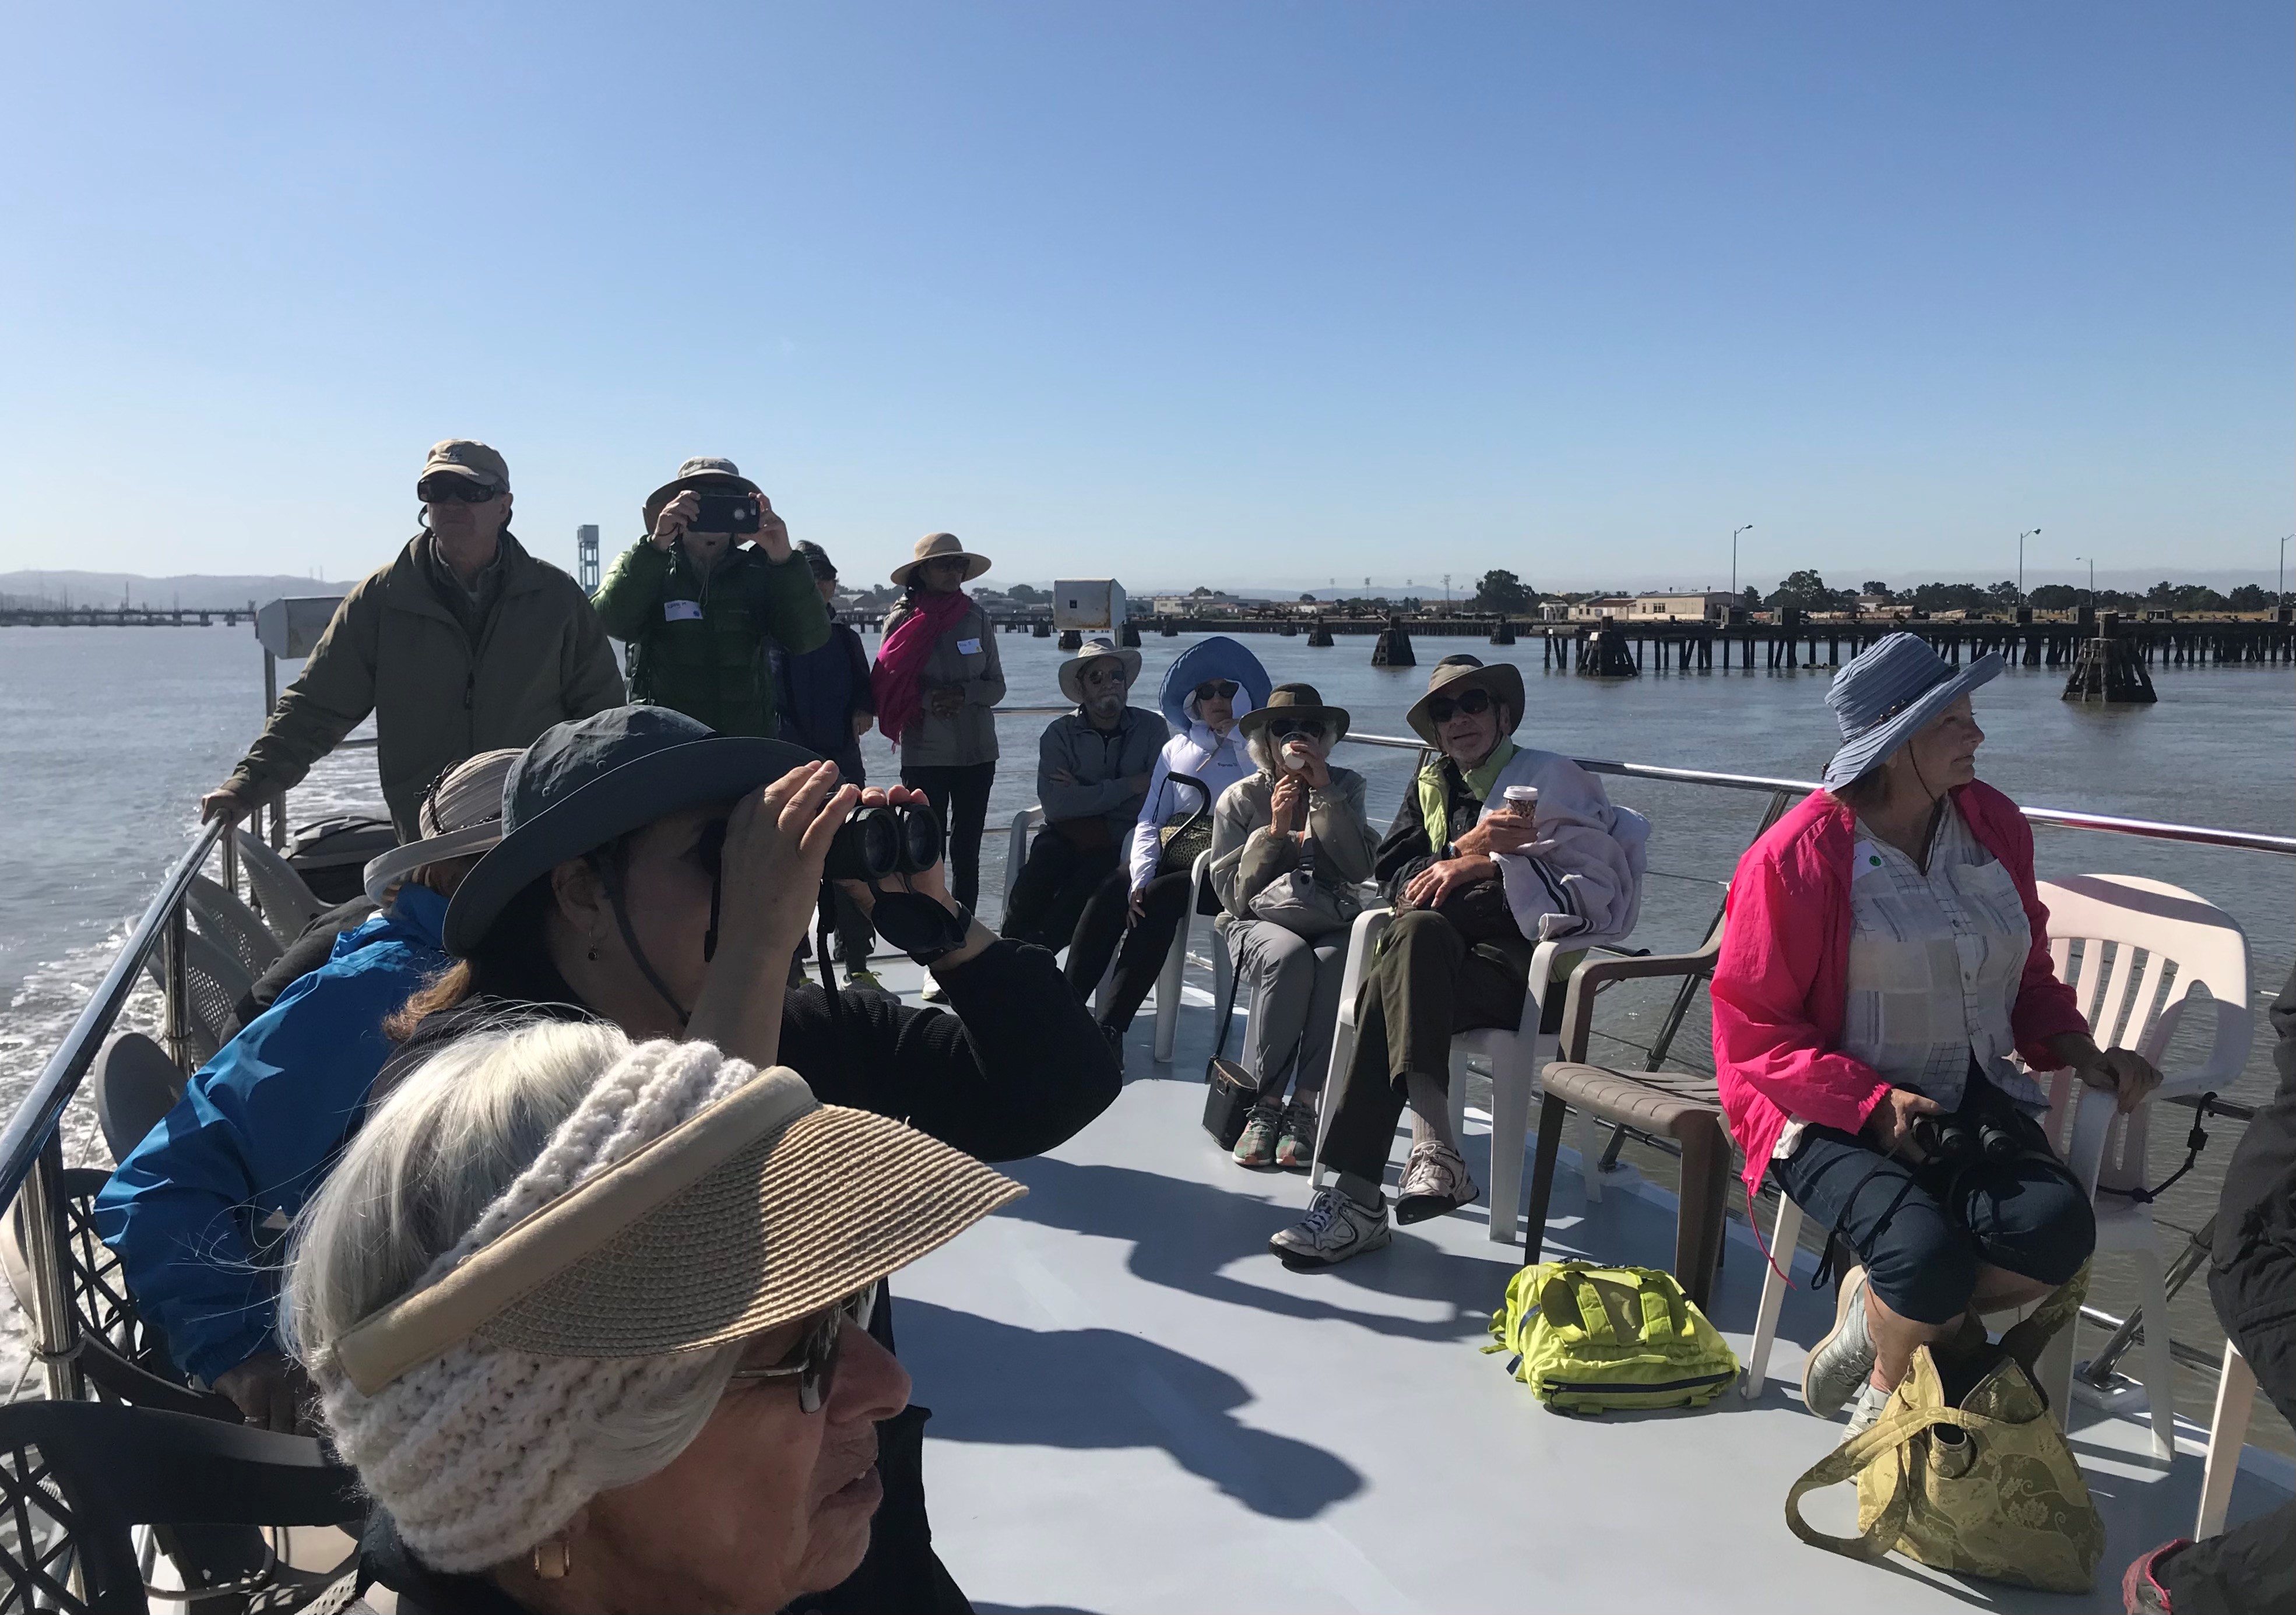 OLLI members seated on the upper deck enjoying amazing 360-degree views of the river, surrounding wetlands and the Mayacamas Mountain Range in the distance.